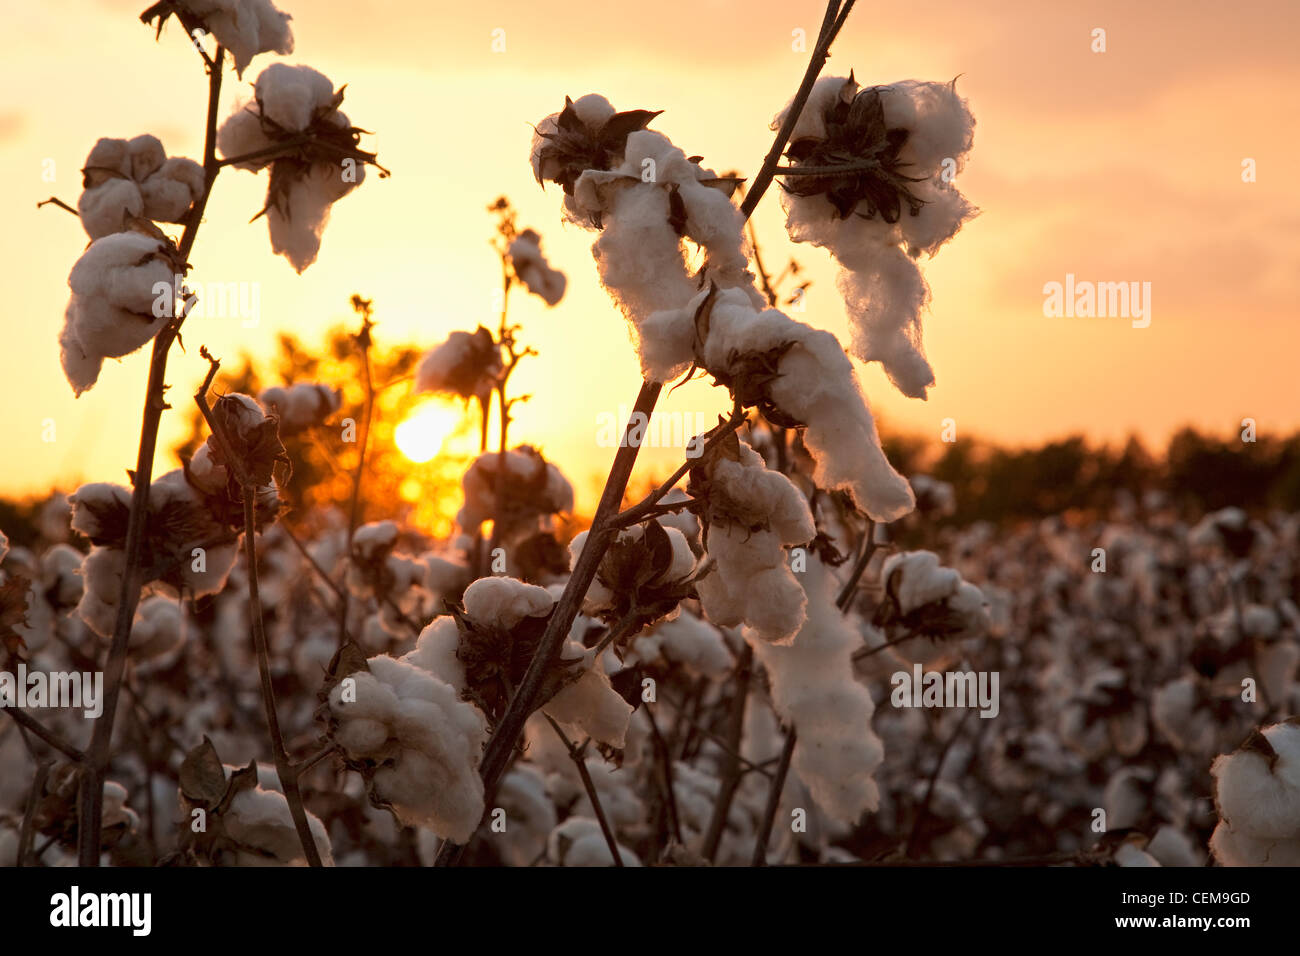 Agriculture - Mature open harvest stage cotton bolls at sunset / Eastern Arkansas, USA. Stock Photo